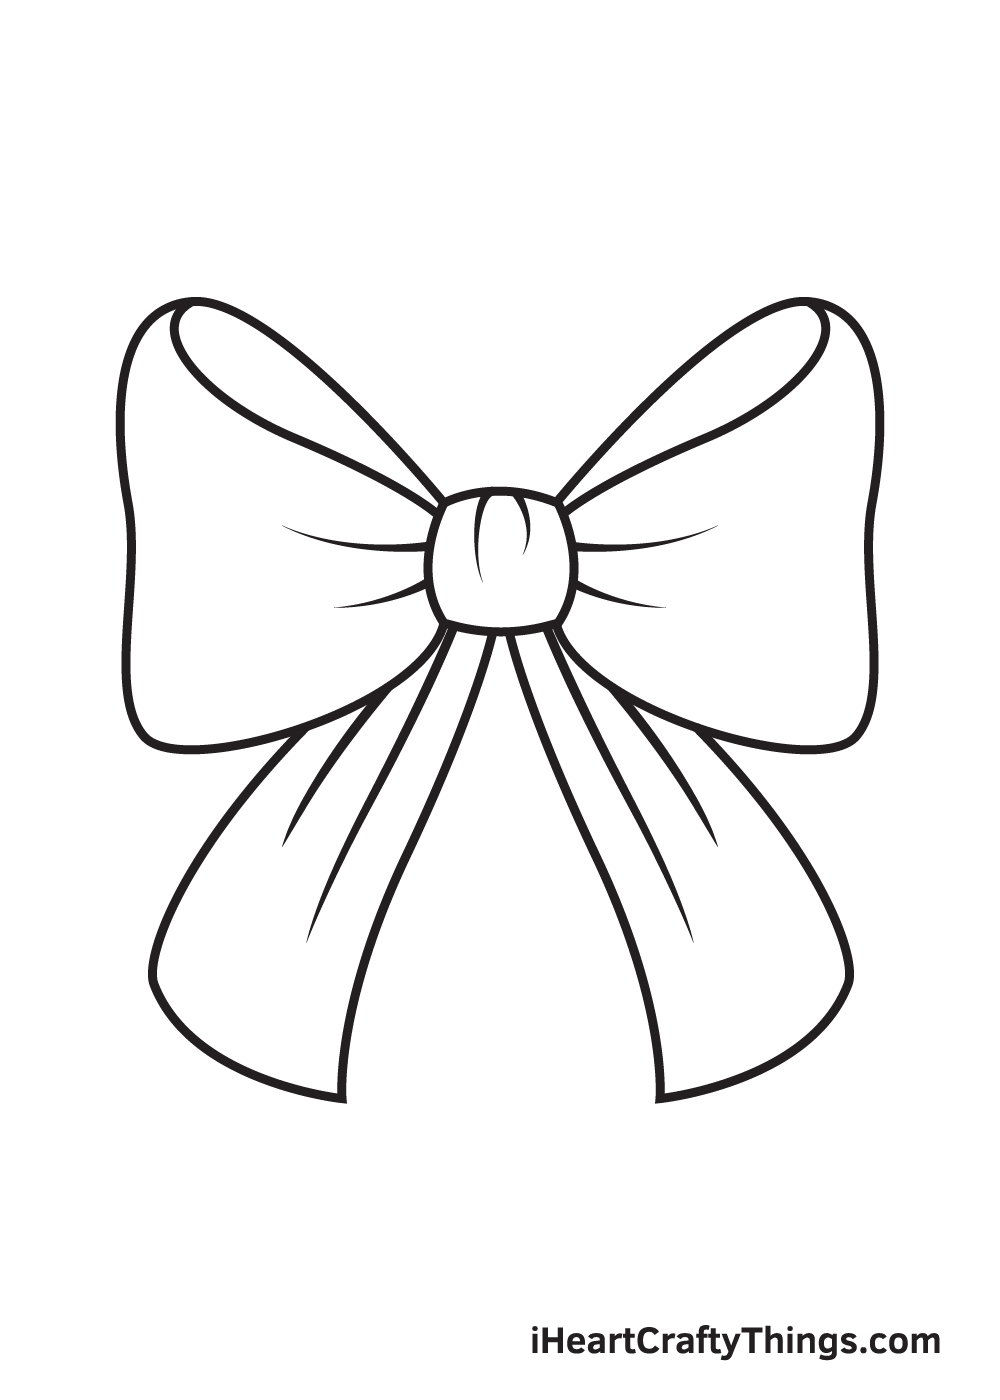 Bow Tie Drawing Art